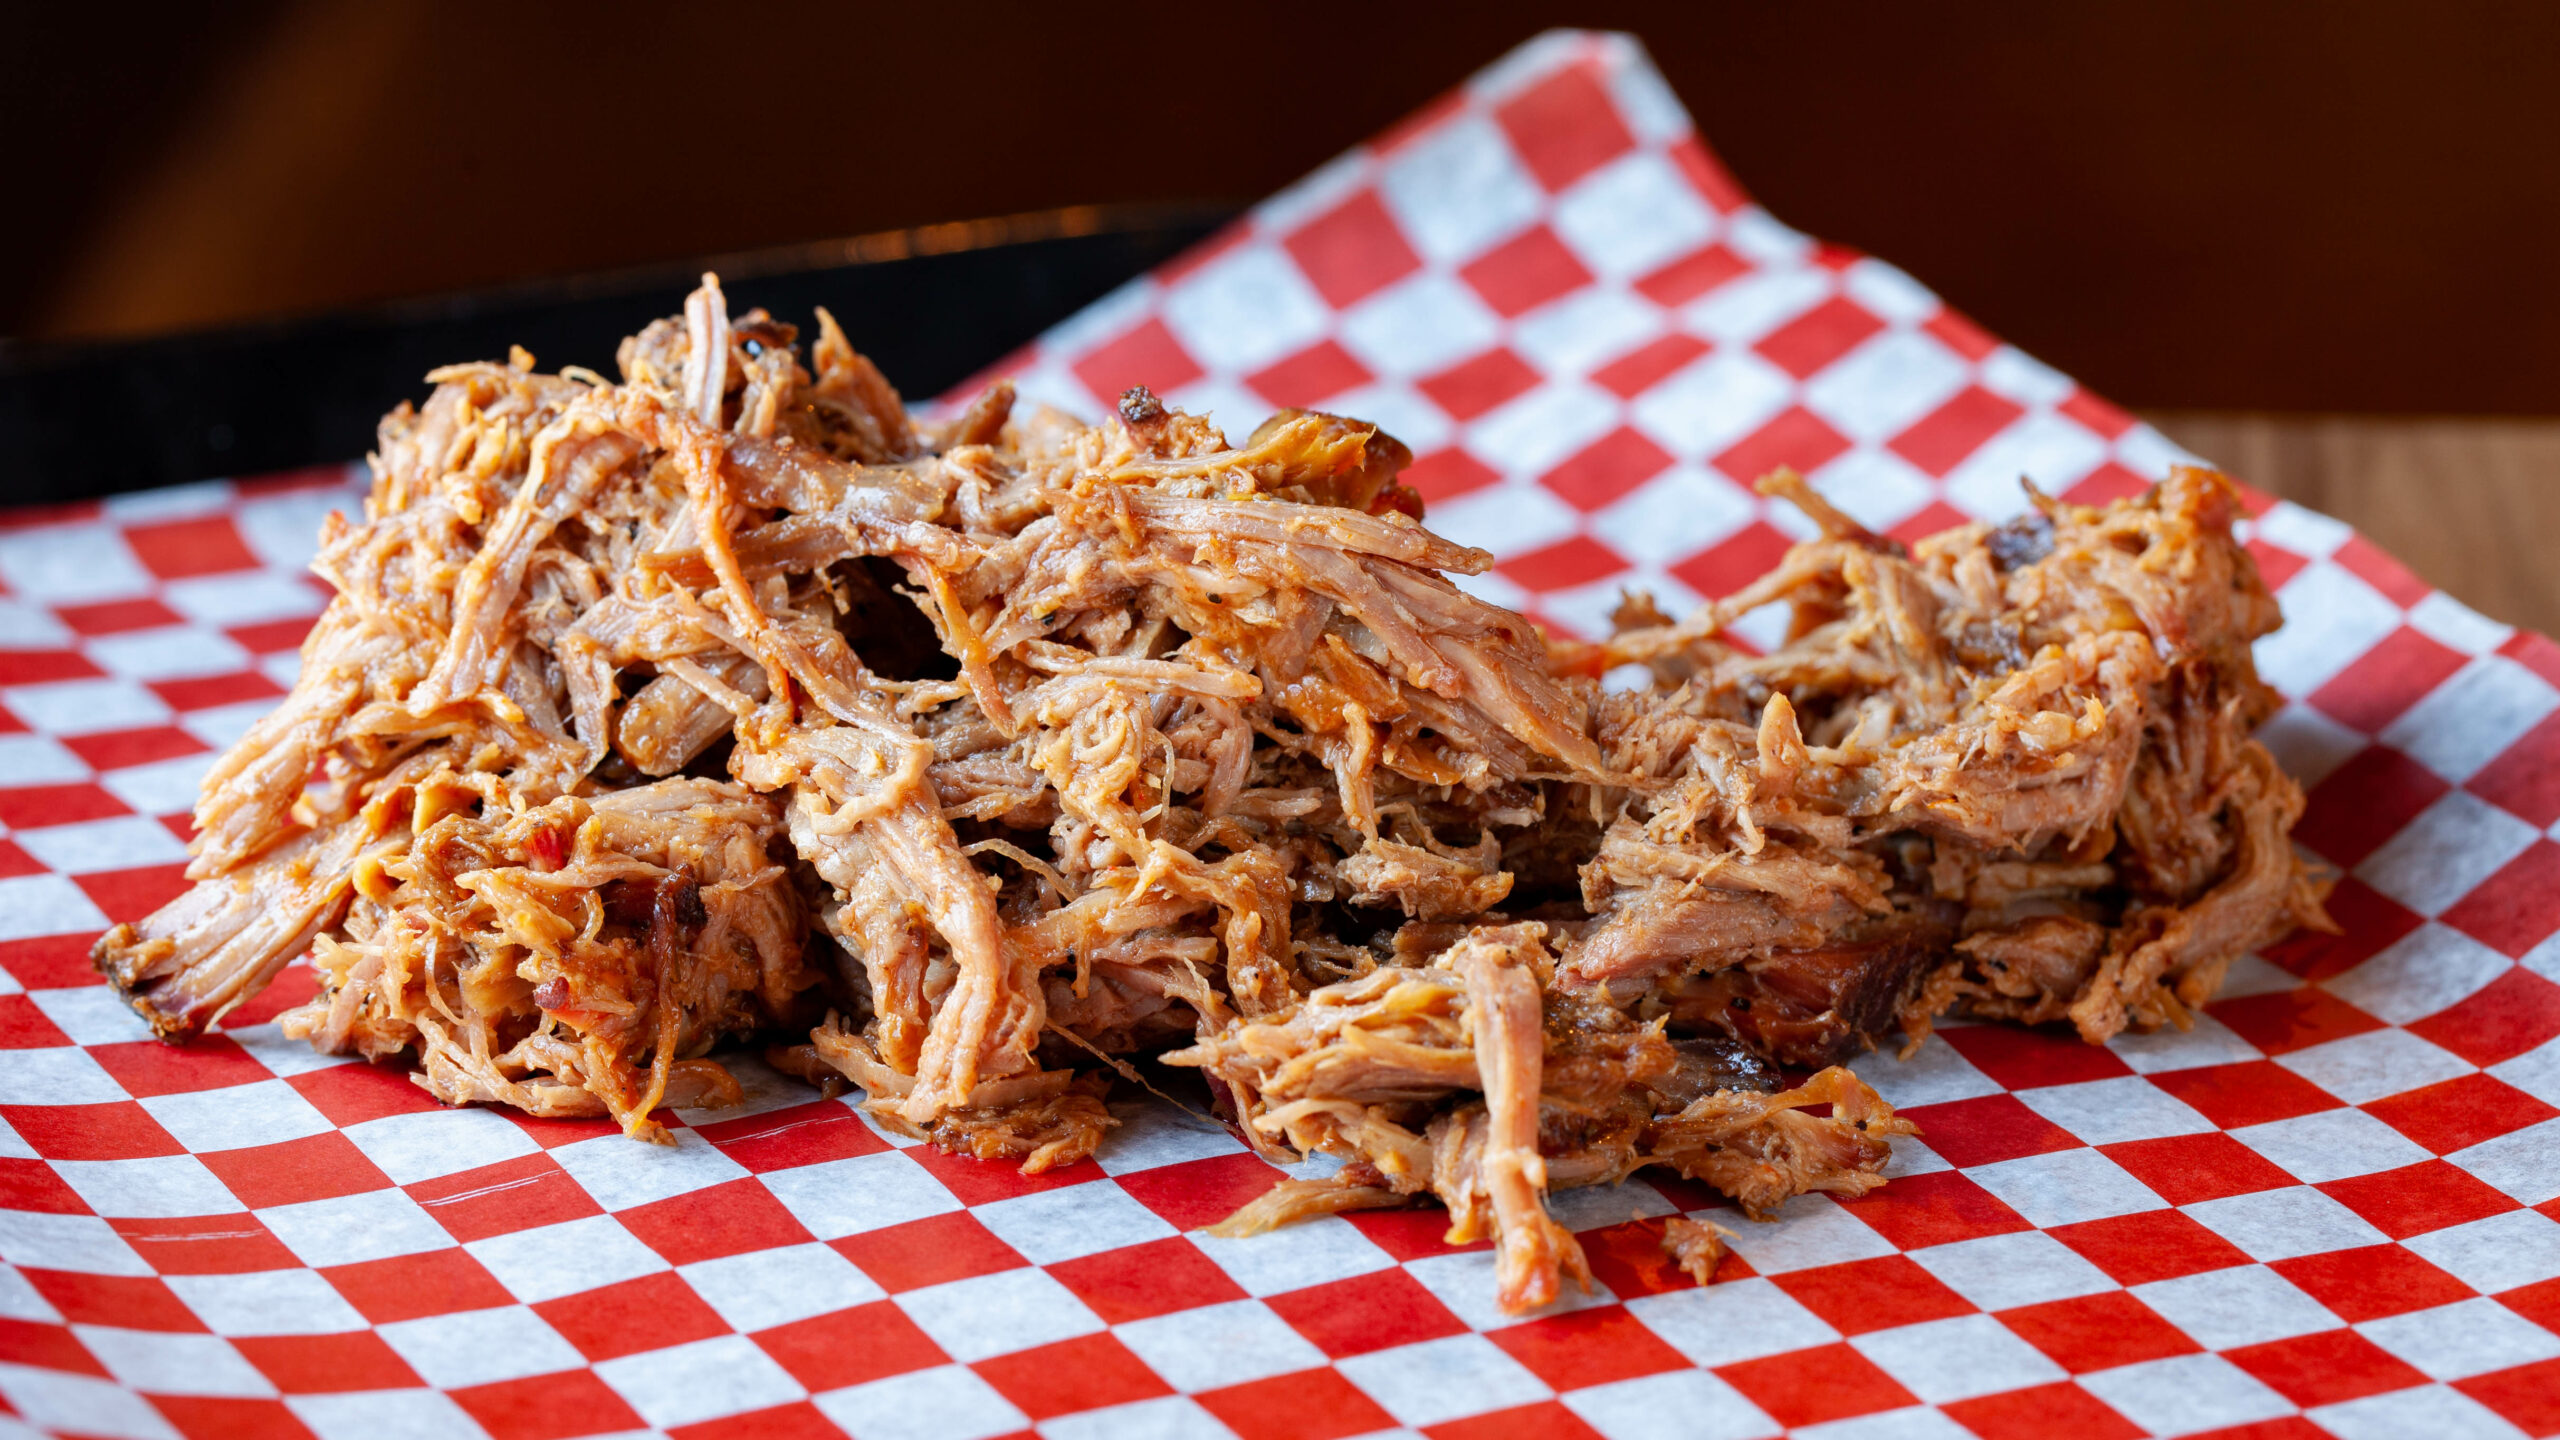 1 lb of Prairie Dog Brewing's Sauced Pulled Pork a la Carte